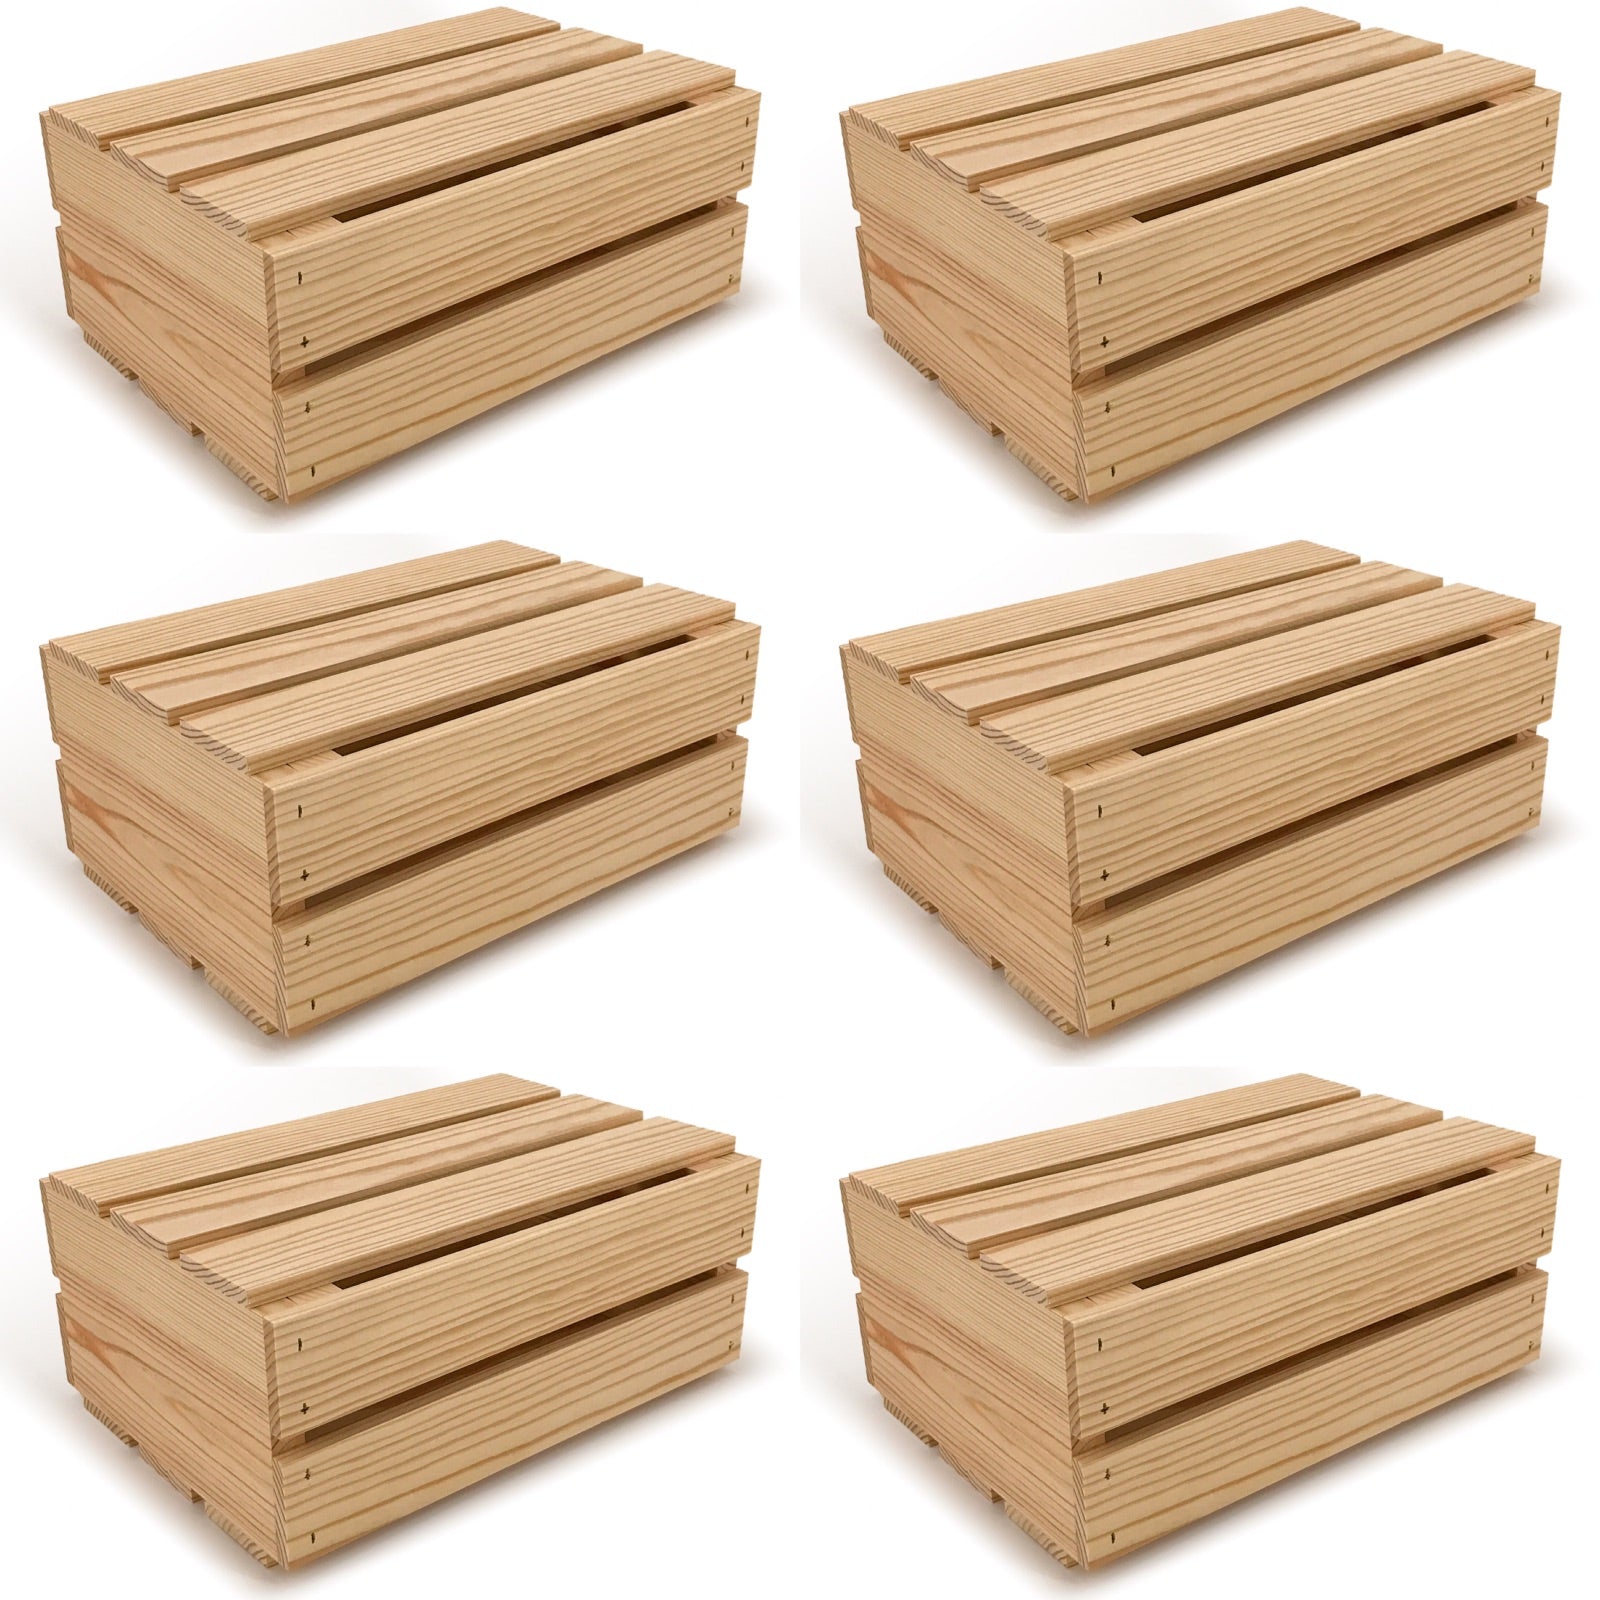 6 Small wooden crates with lid 12x9x5.25